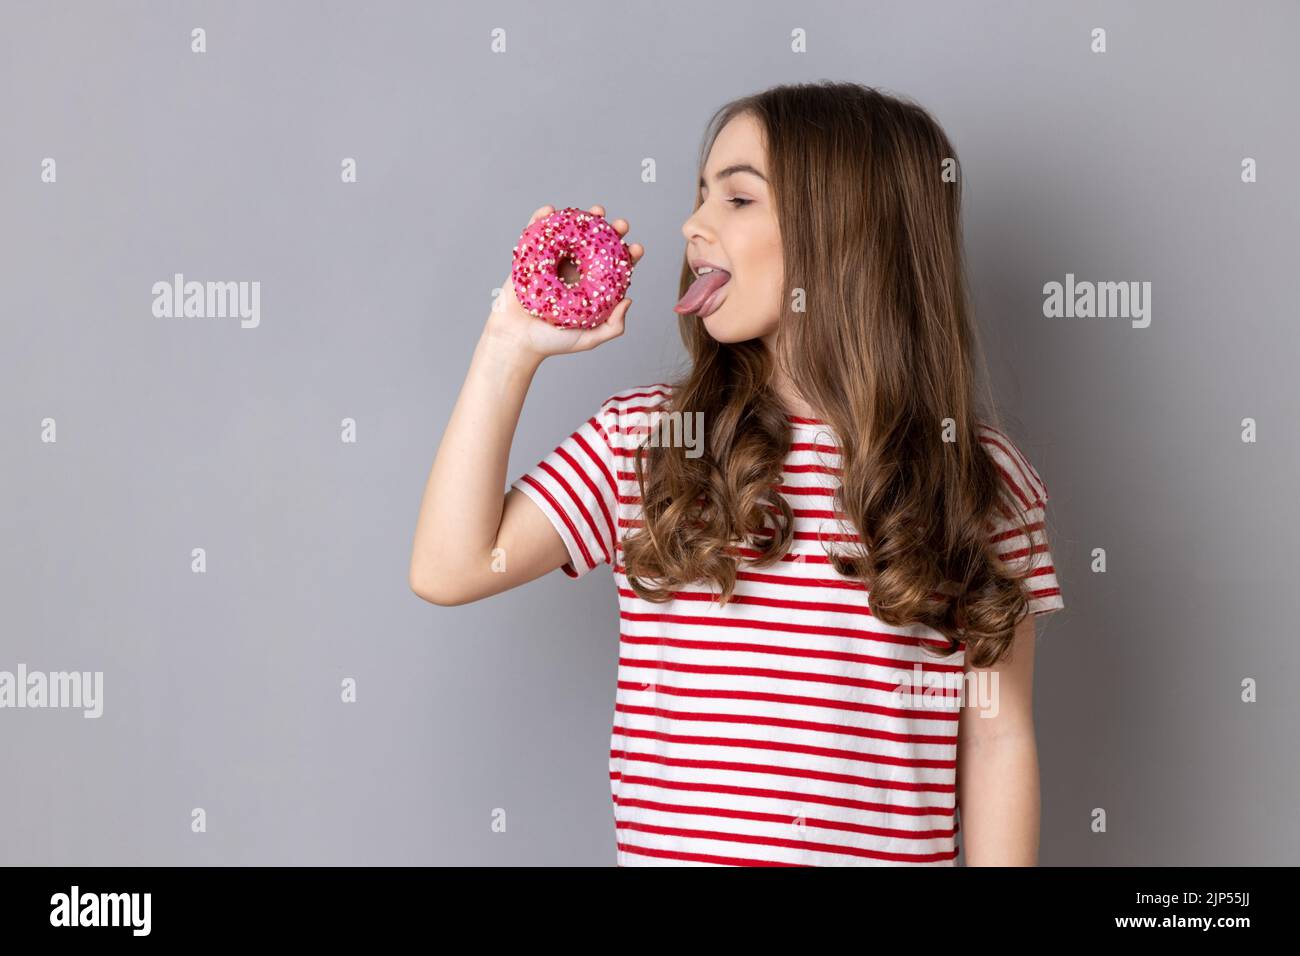 Portrait of hungry little girl wearing striped T-shirt standing licking doughnut and showing tongue out, sweet sugary confectionary. Indoor studio shot isolated on gray background. Stock Photo